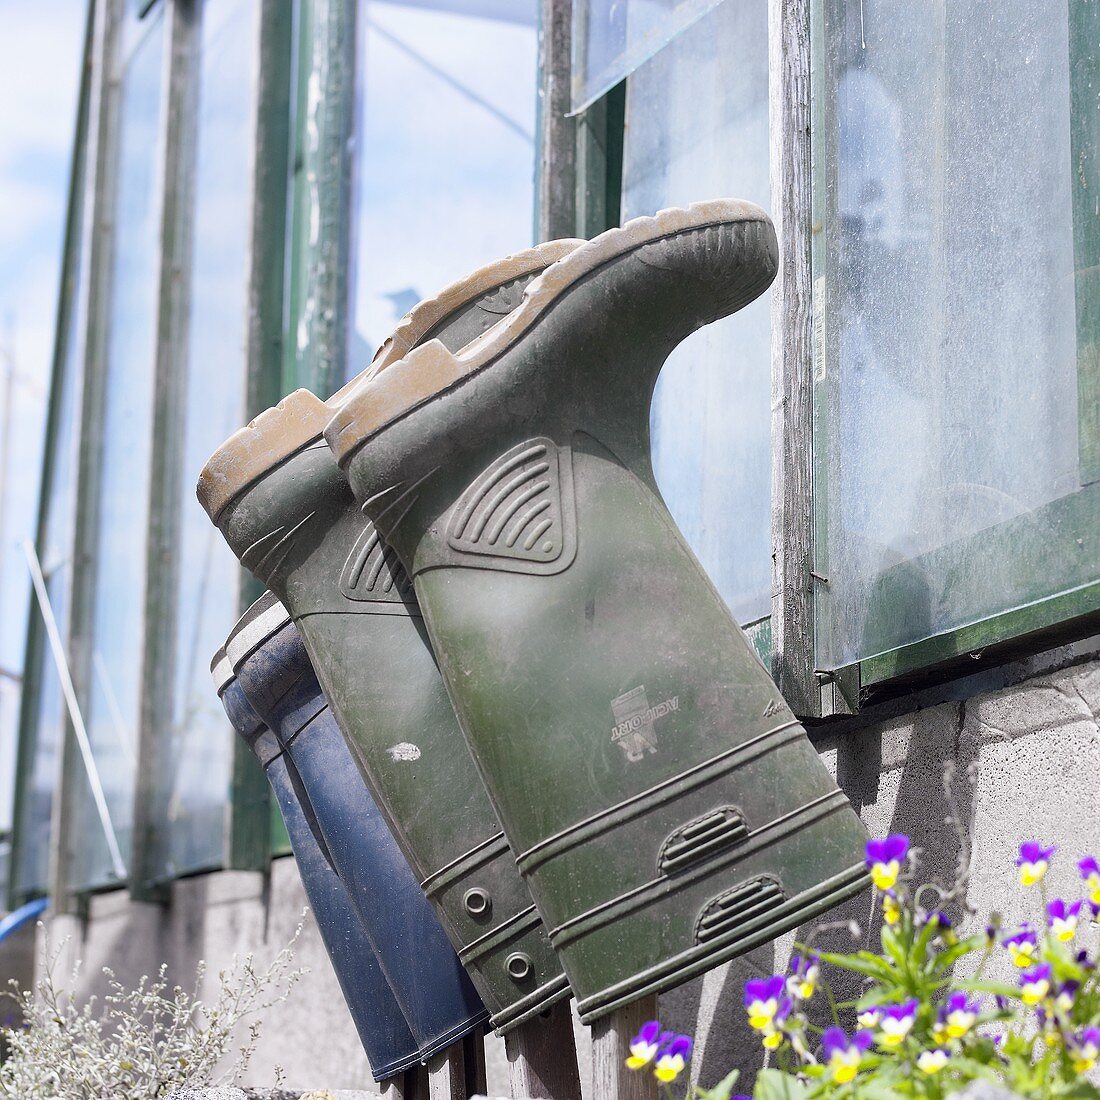 Rubber boots hanging on the wall of a greenhouse